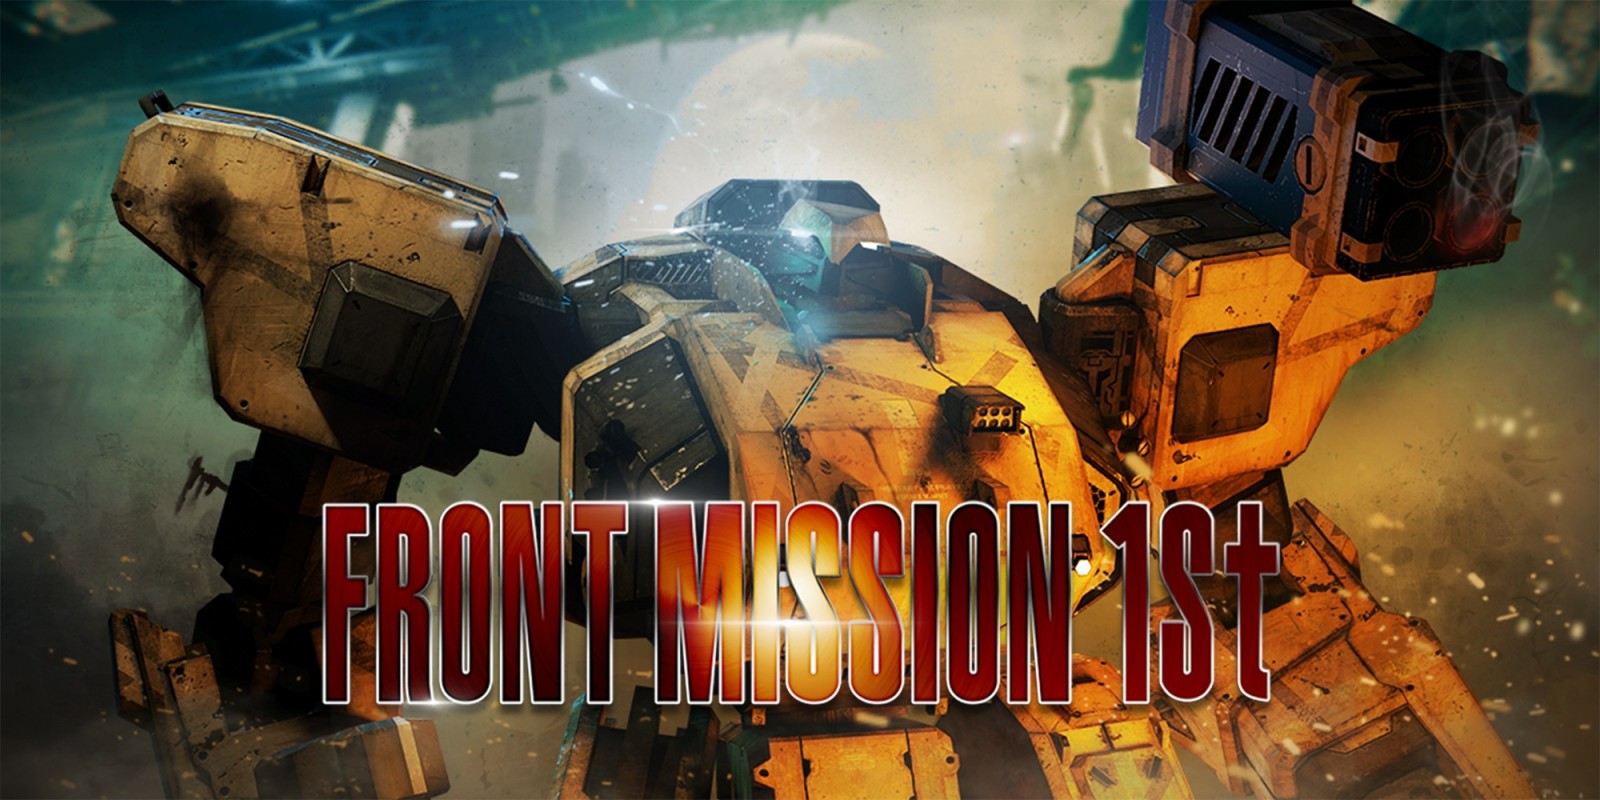 FRONT MISSION 1st: Remake arribarà a PC, PlayStation i Xbox